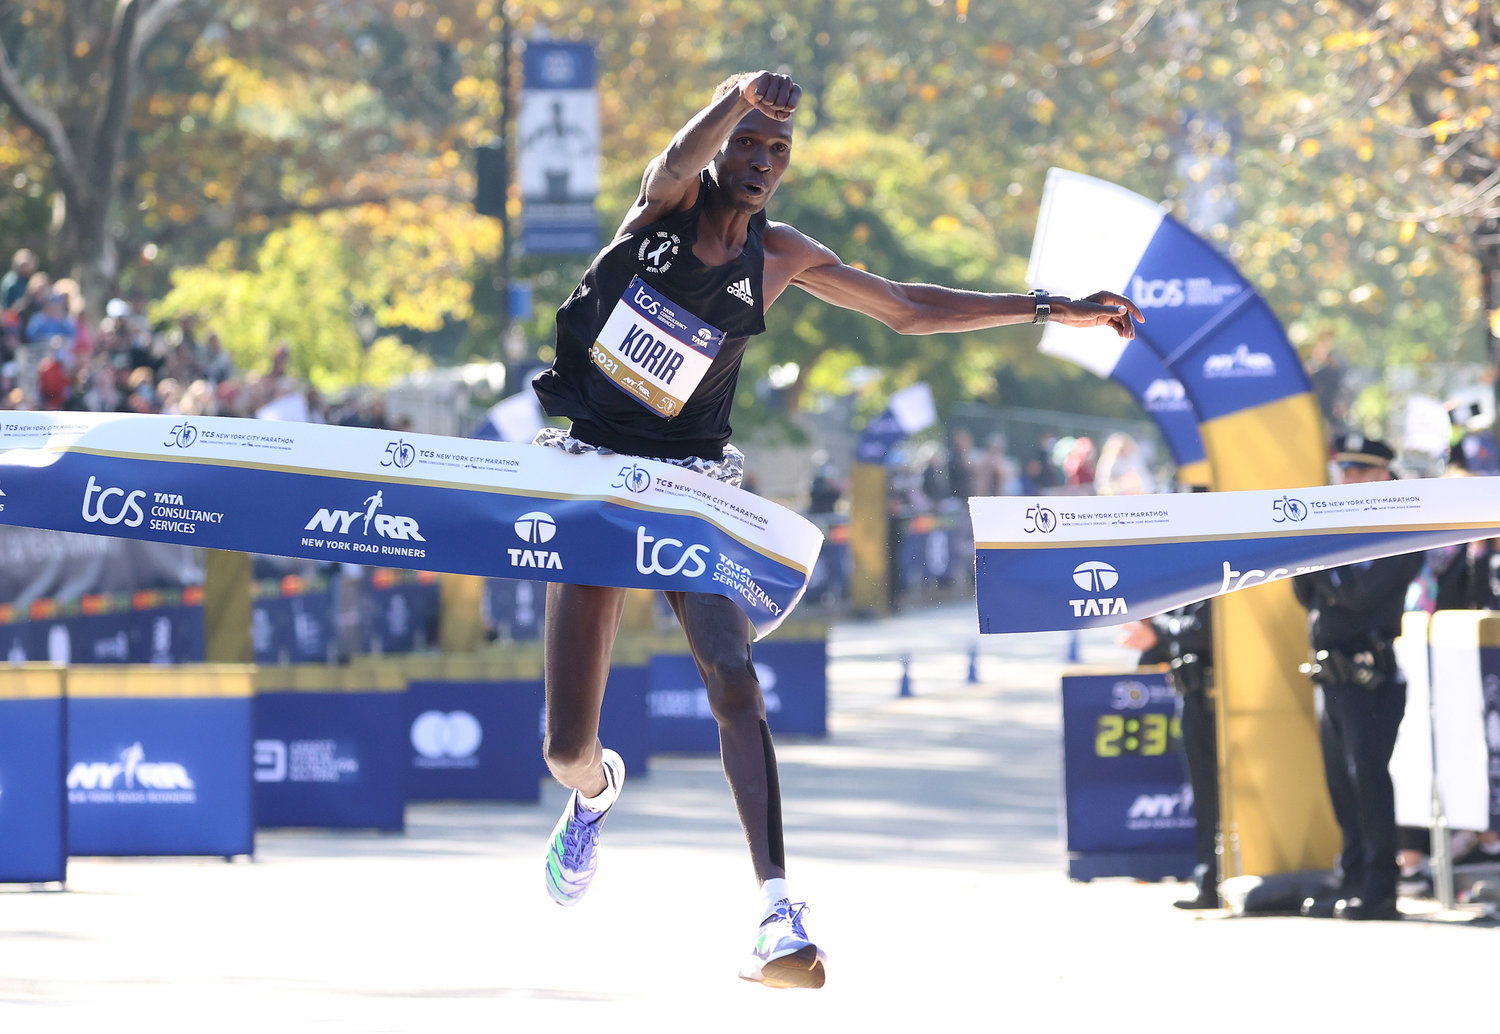 Albert Korir of Kenya celebrates after he won the Men's division of the 2021 TCS New York City Marathon in Central Park on Sunday, Nov. 7, 2021 in New York City. (Elsa/Getty Images/TNS)